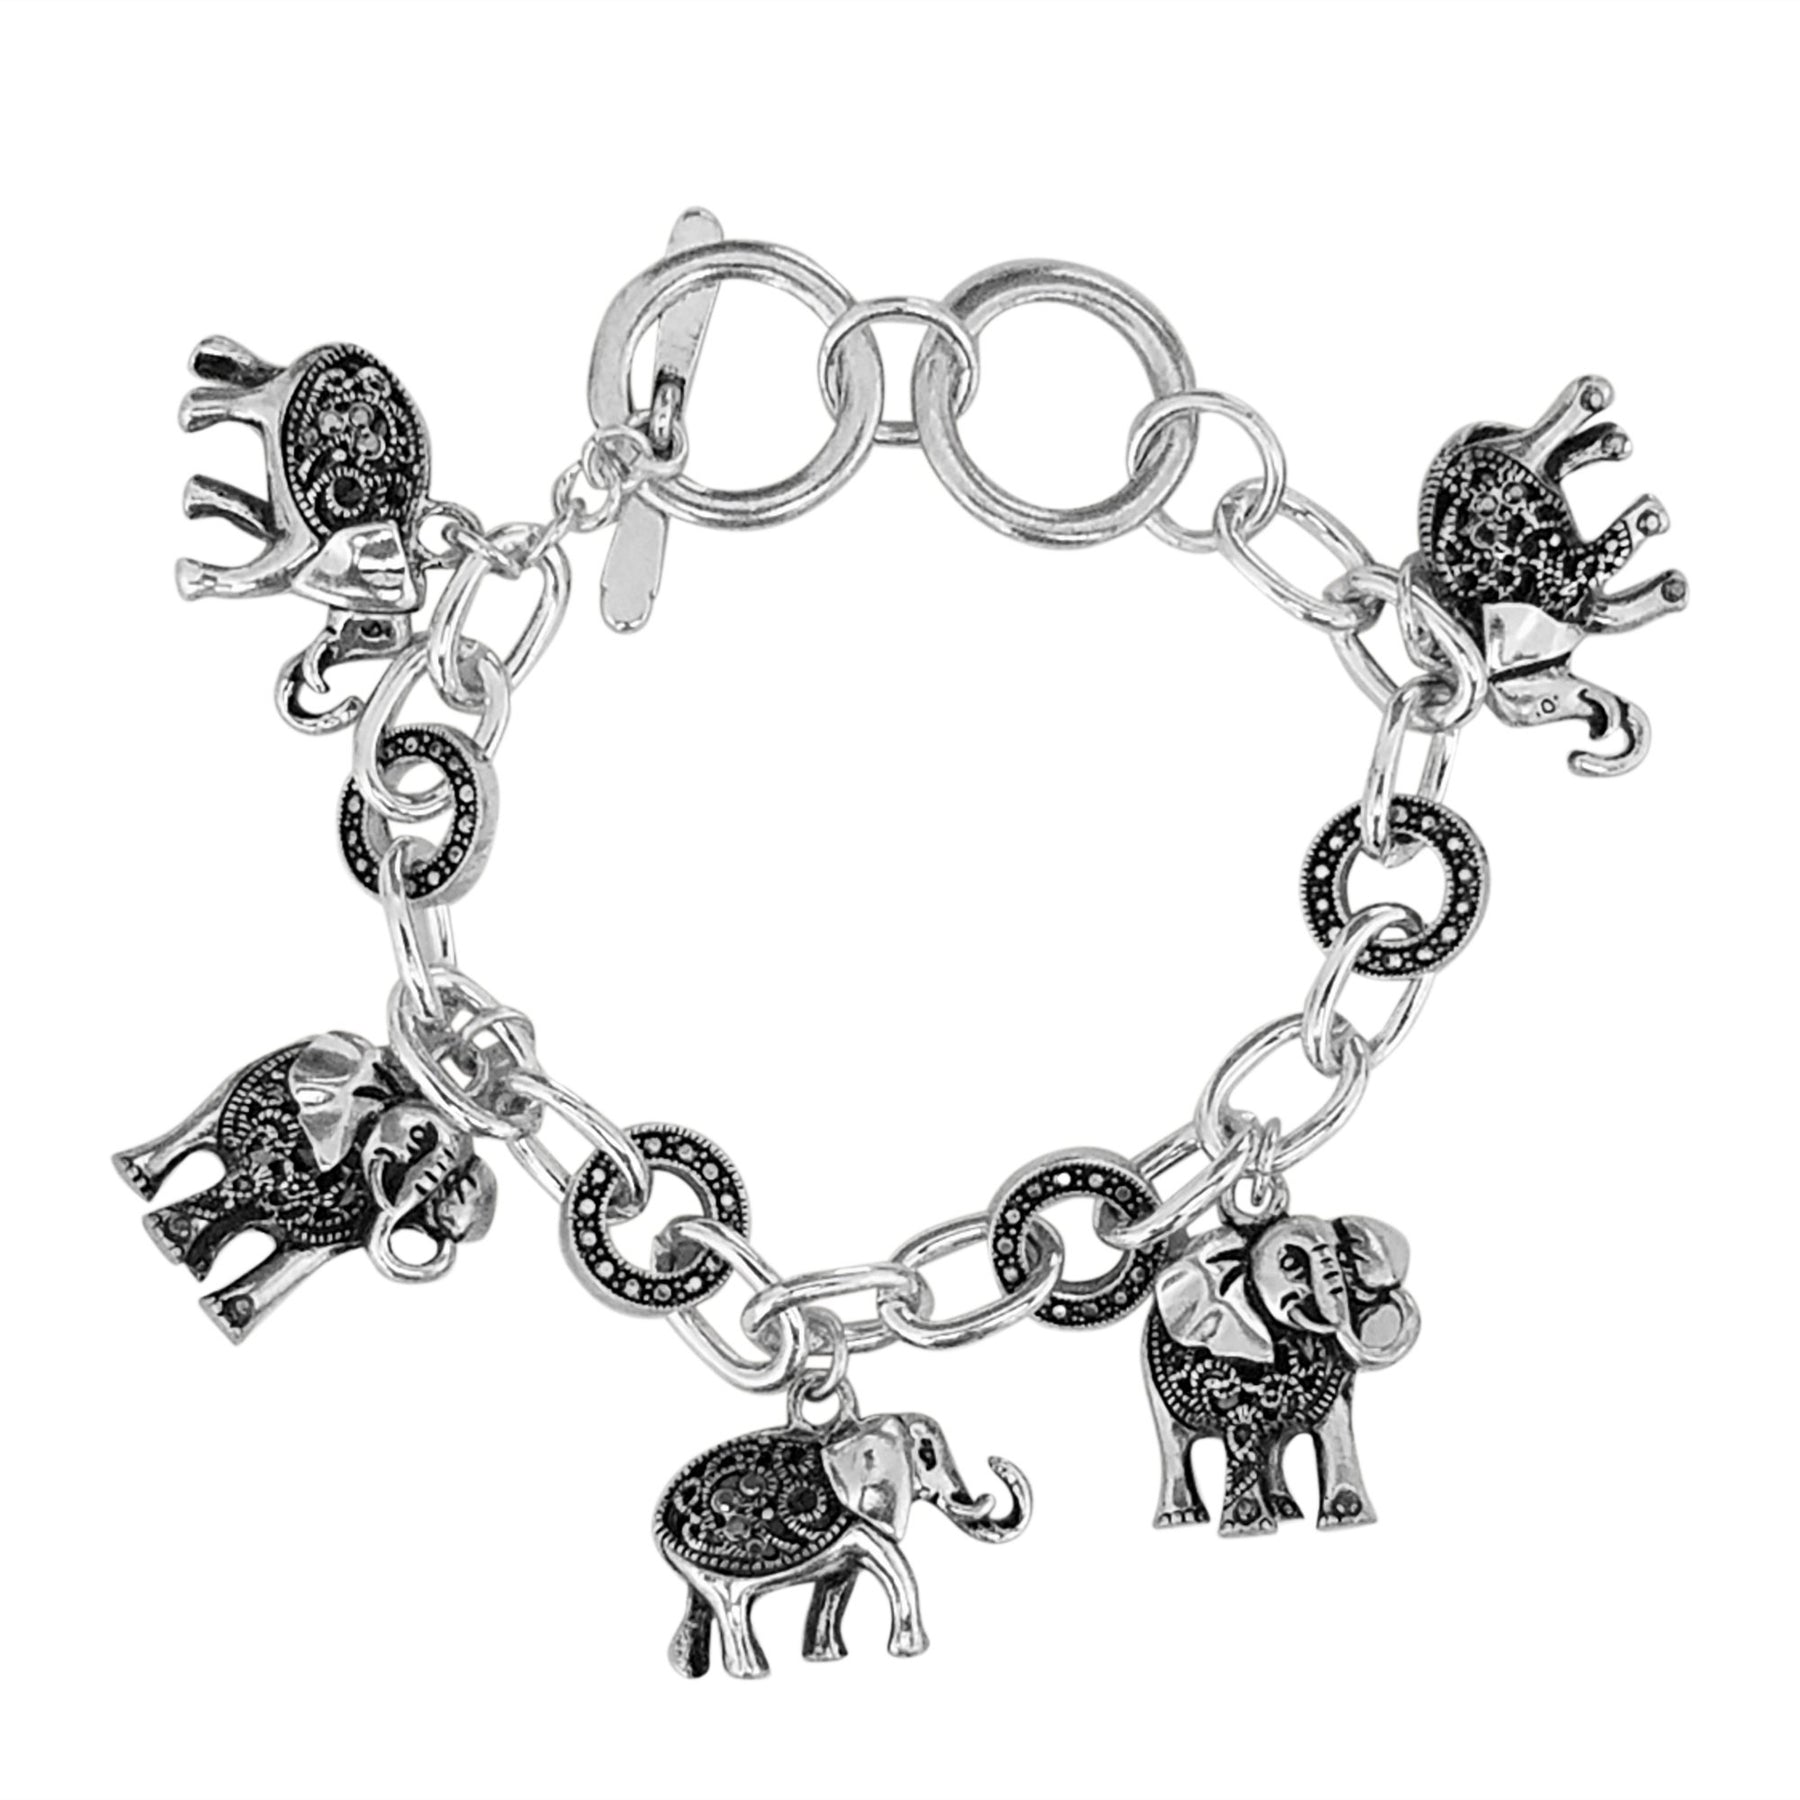 1 of 2: Silver Toned Adjustable Elephant Charm Bracelet with Toggle Clasp